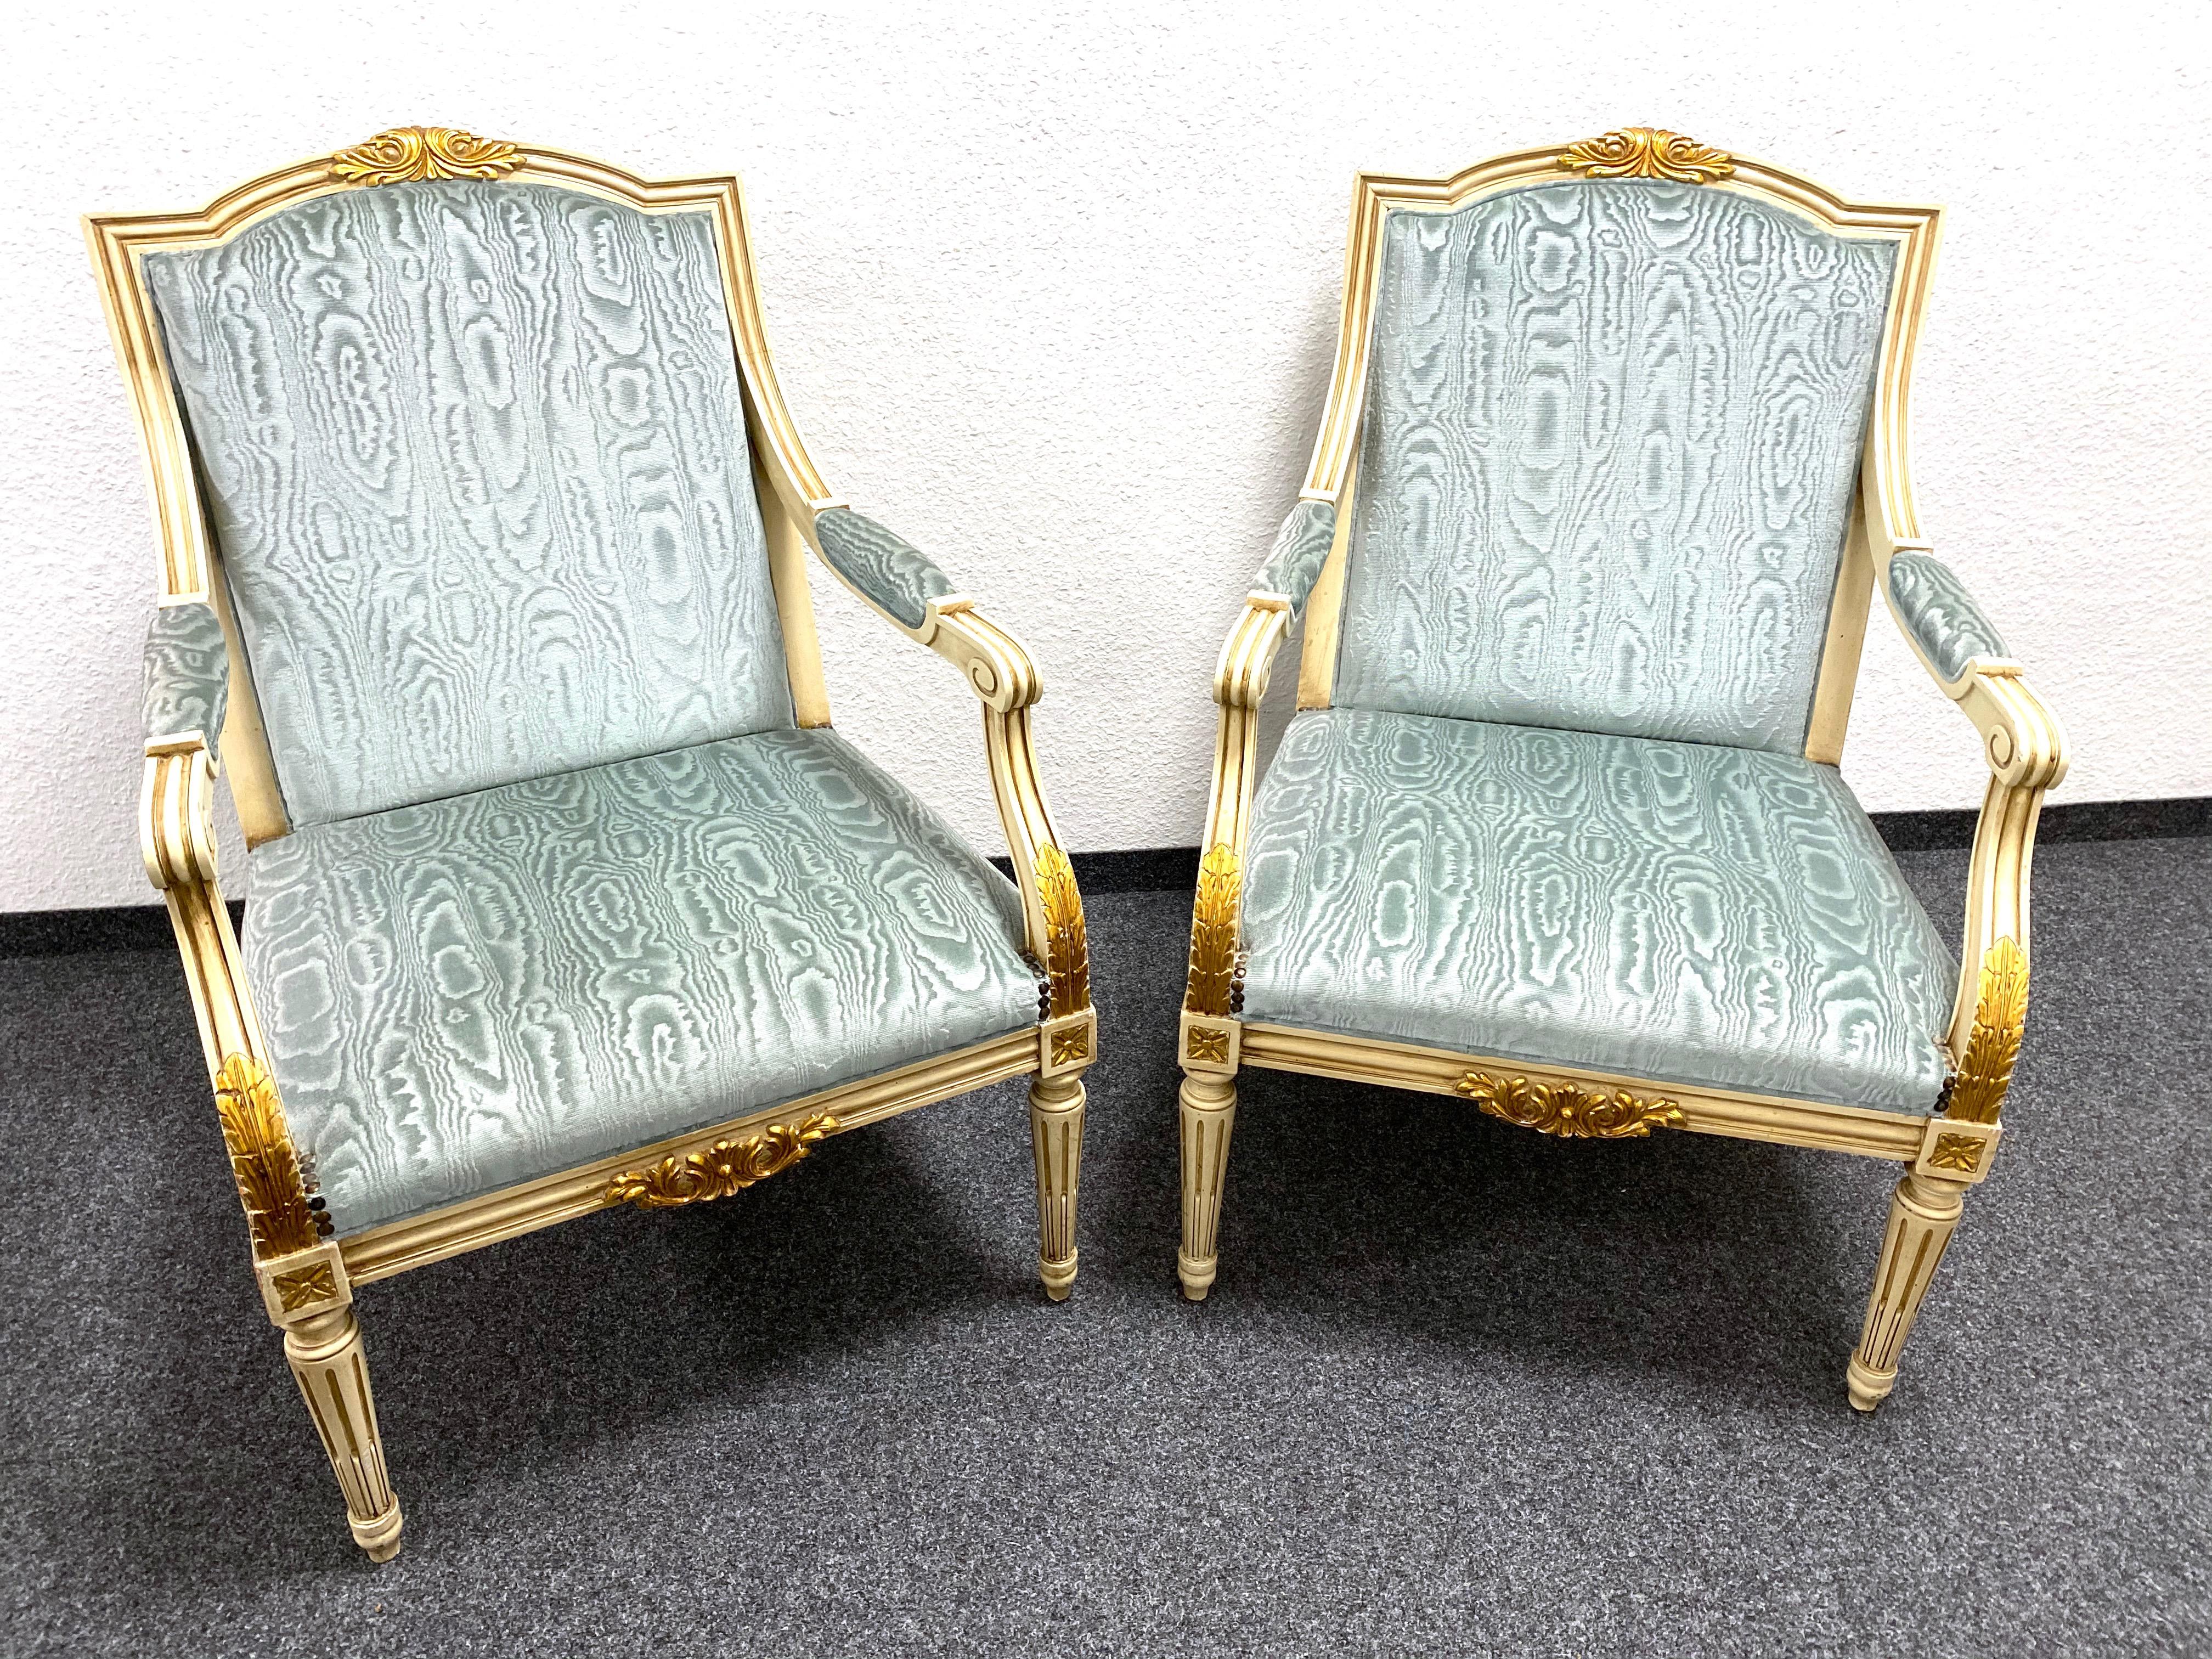 A gorgeous pair or crème or chippy white paint chairs in an Empire Style. These chairs have beautiful guilt details throughout. Add an elegant touch to your home with this exceptional pair of vintage chairs. Again, the chairs are in original as